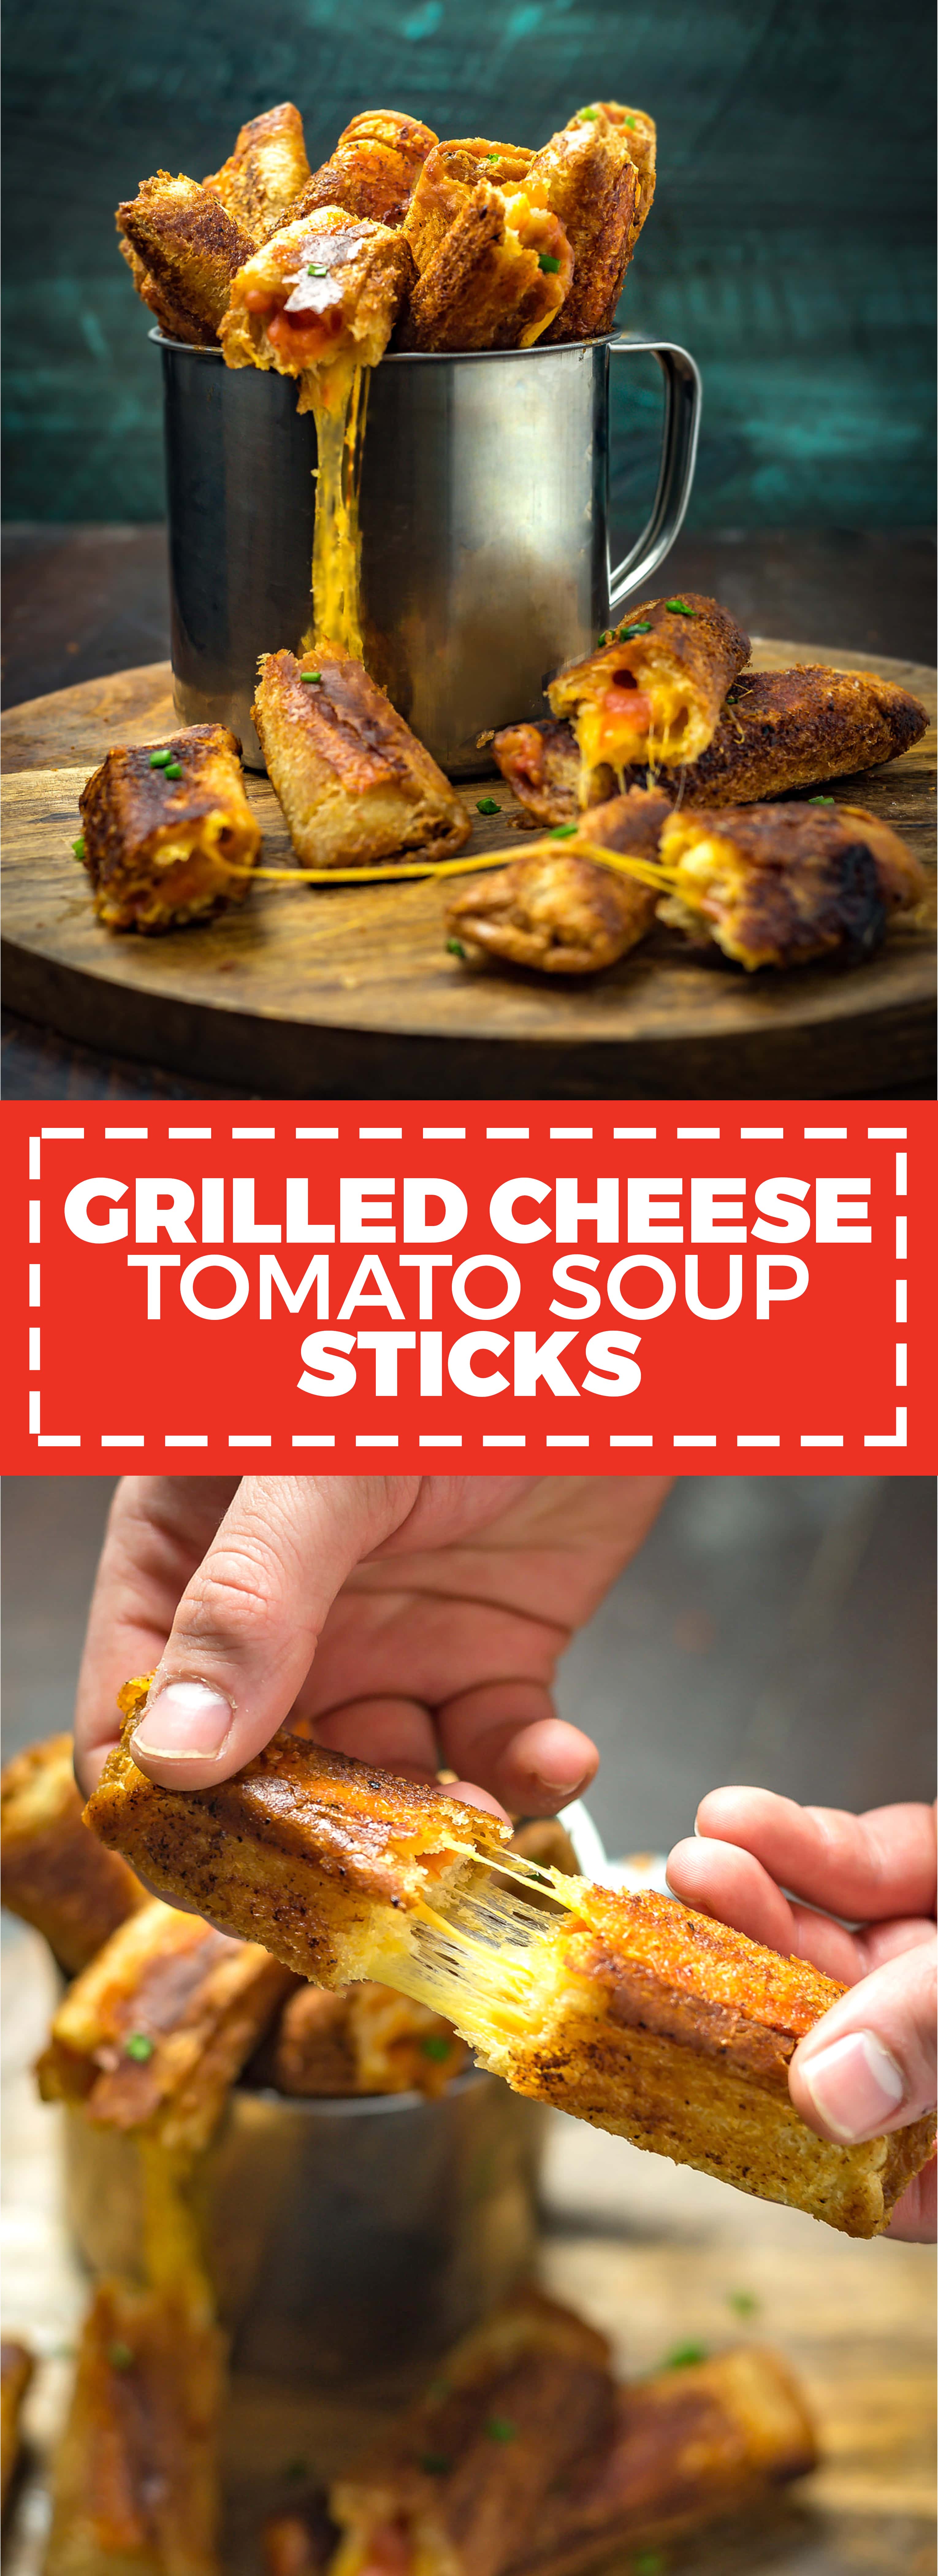 Grilled Cheese Tomato Soup Sticks. These fun and easy to make sticks are filled with cheddar cheese and tomato soup! Perfect for lunch, snacks, or even parties! | hostthetoast.com